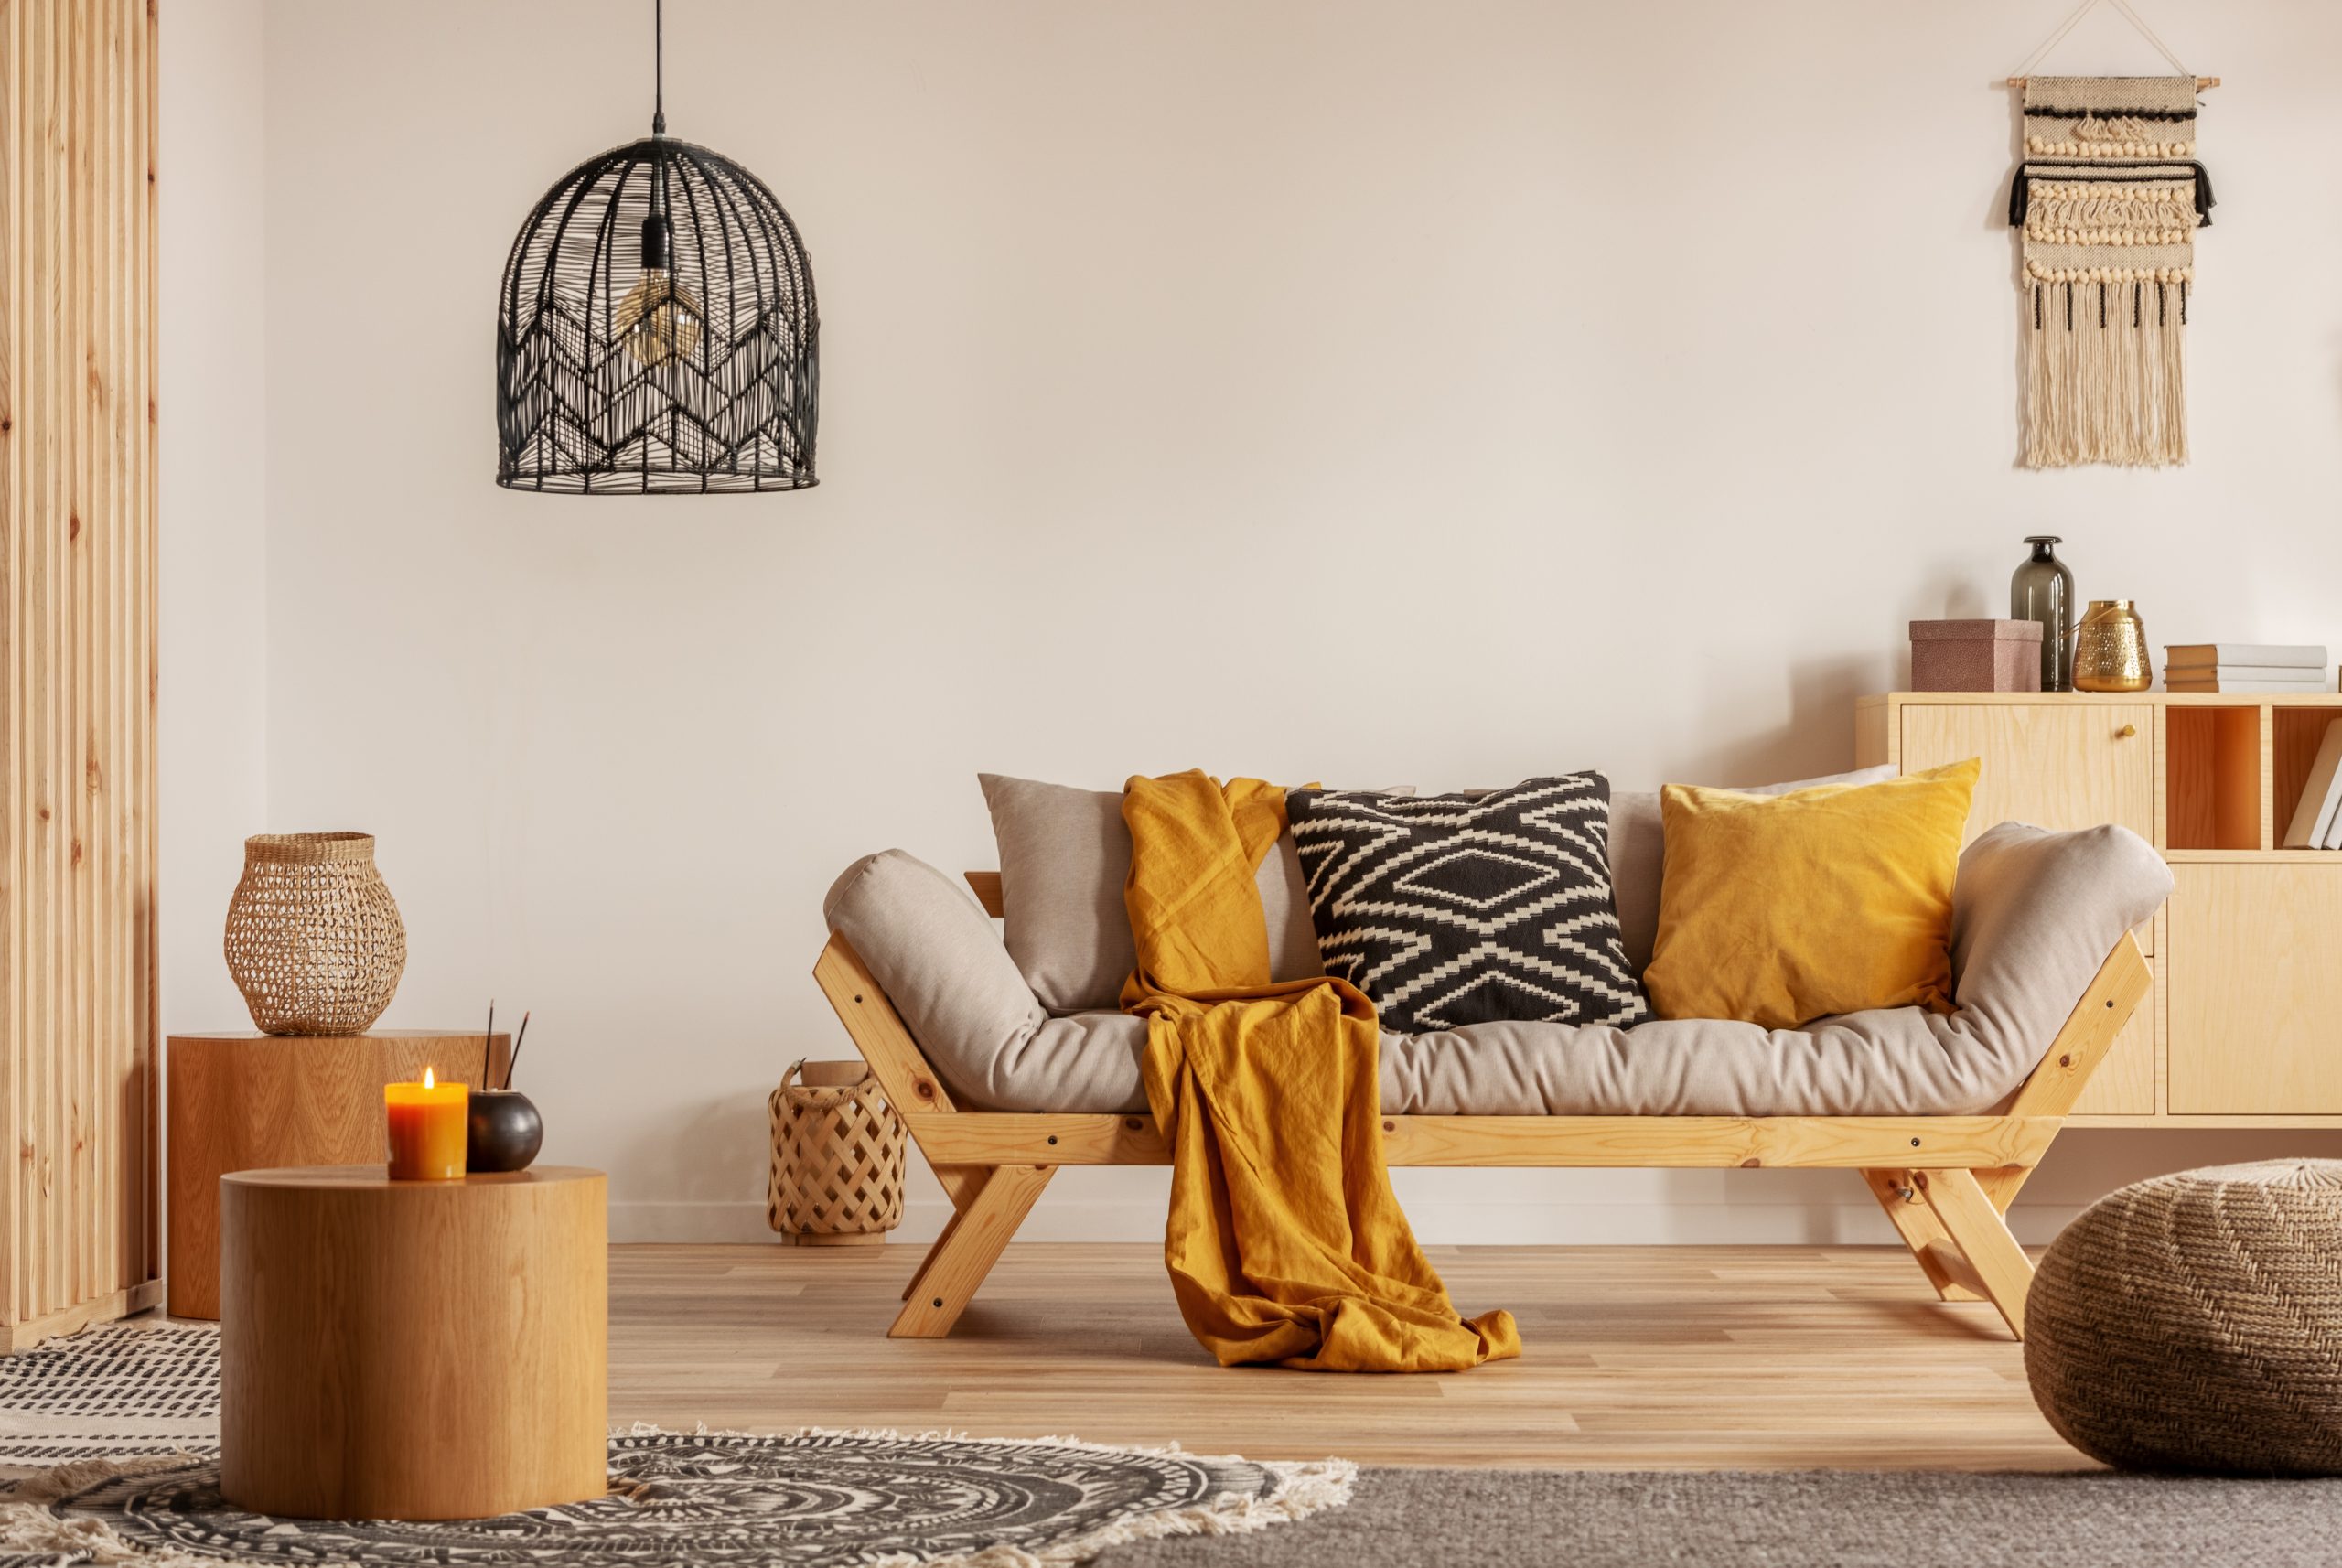 Scandinavian sofa with pillows and dark yellow blanket in bright living room interior with black chandelier